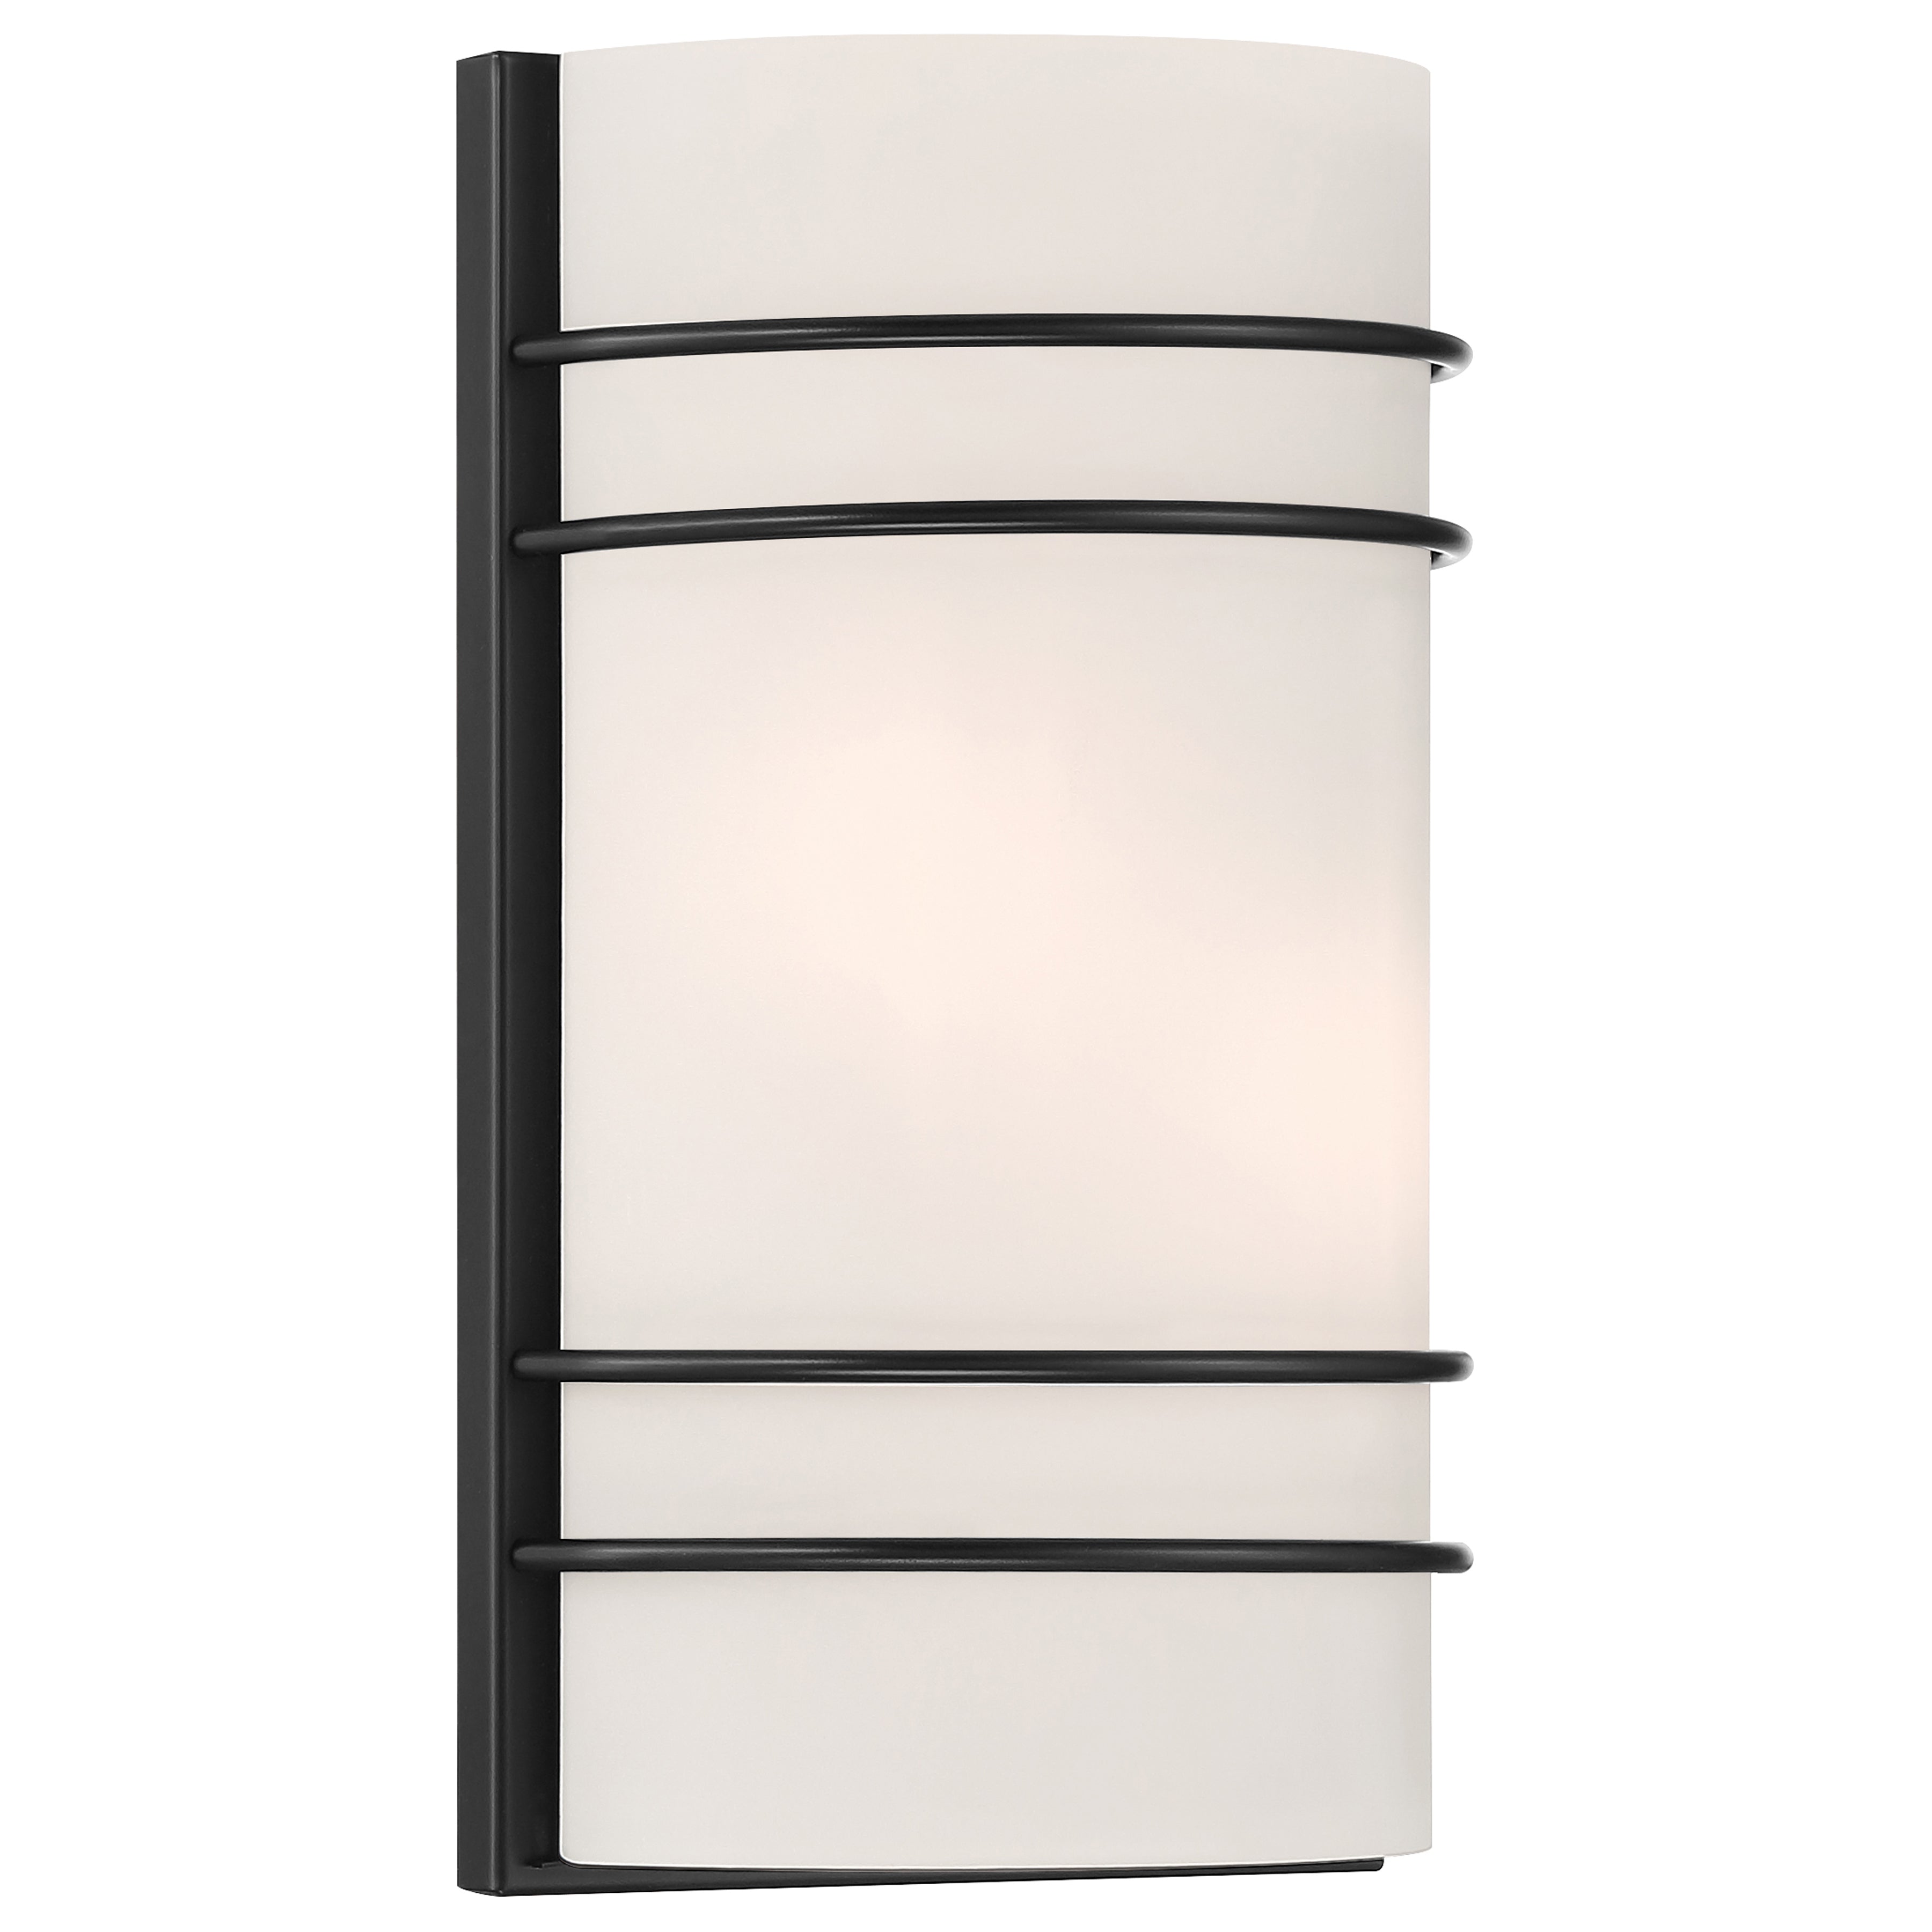 Access Lighting Cassi LED Wall Sconce